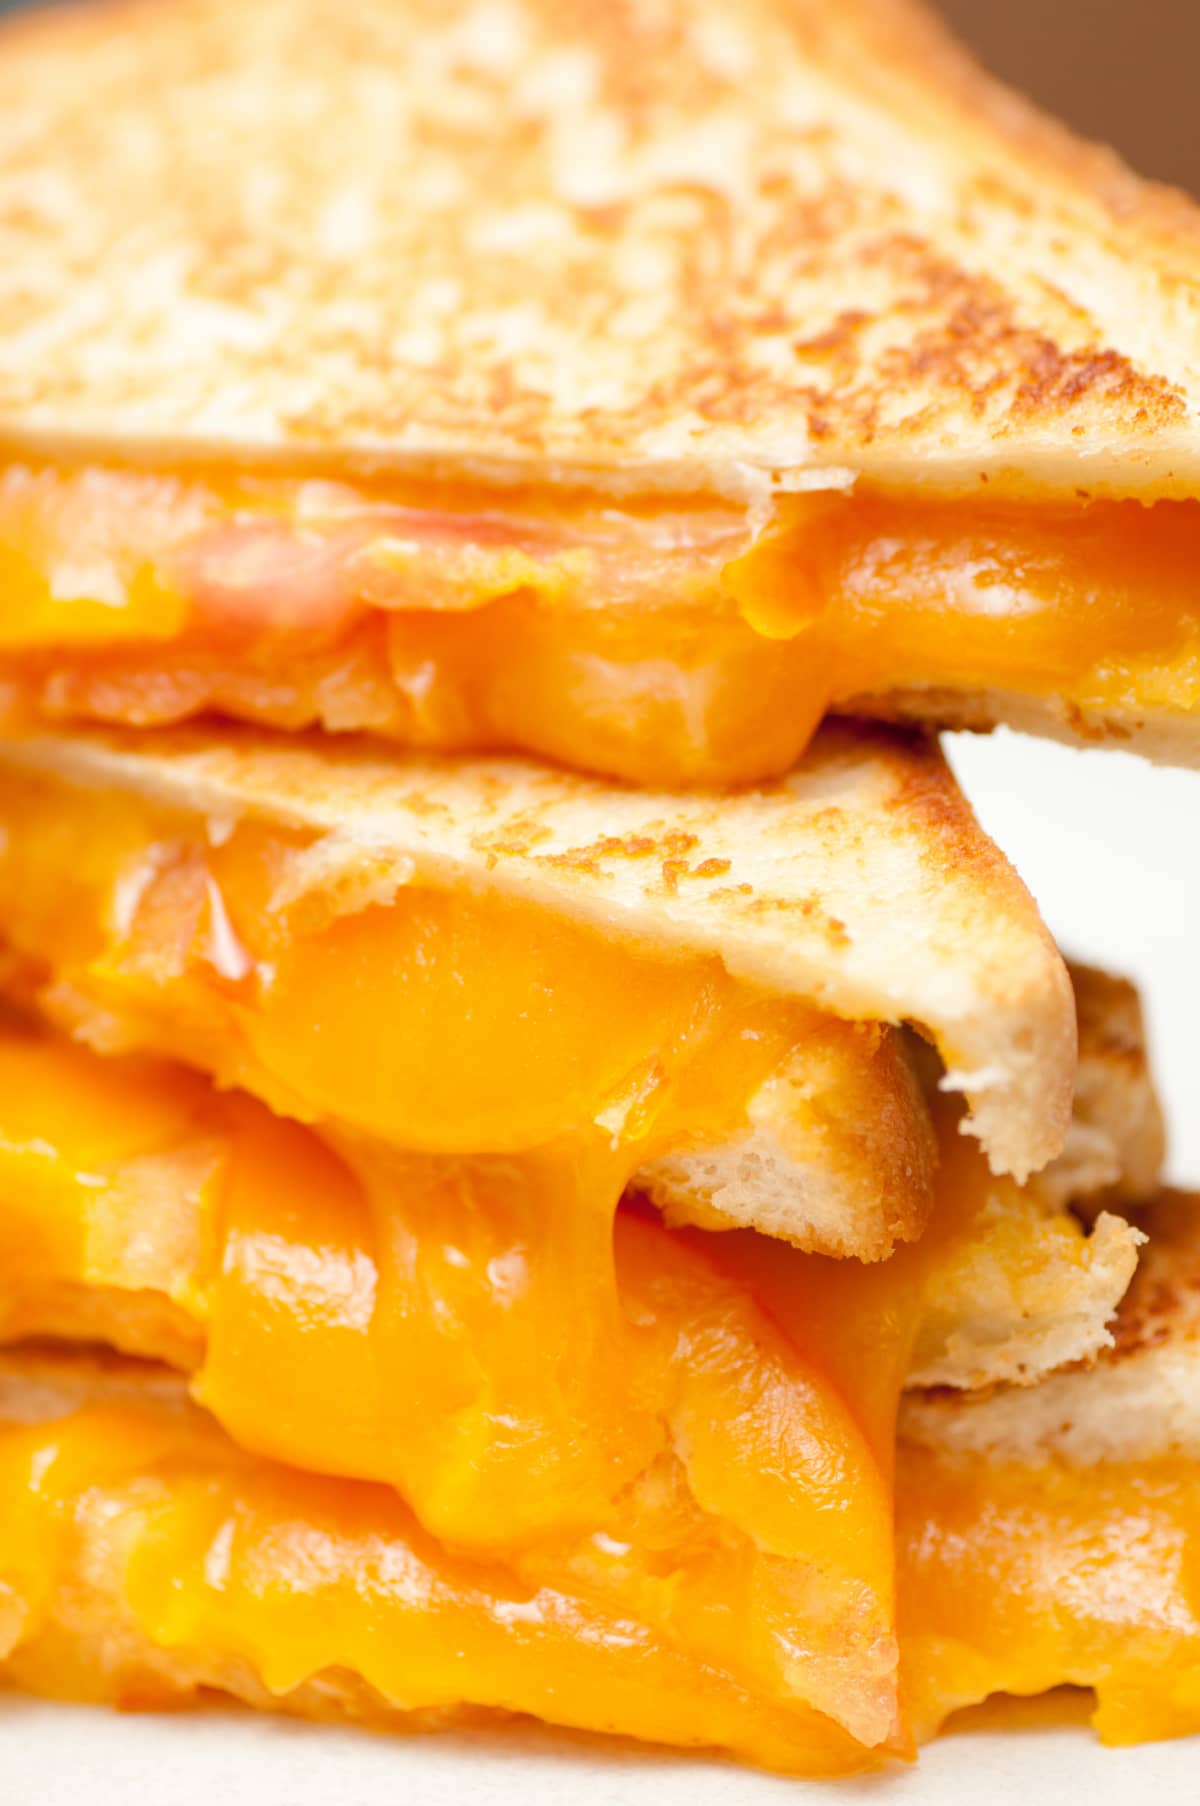 Close-up of a grilled cheese sandwich